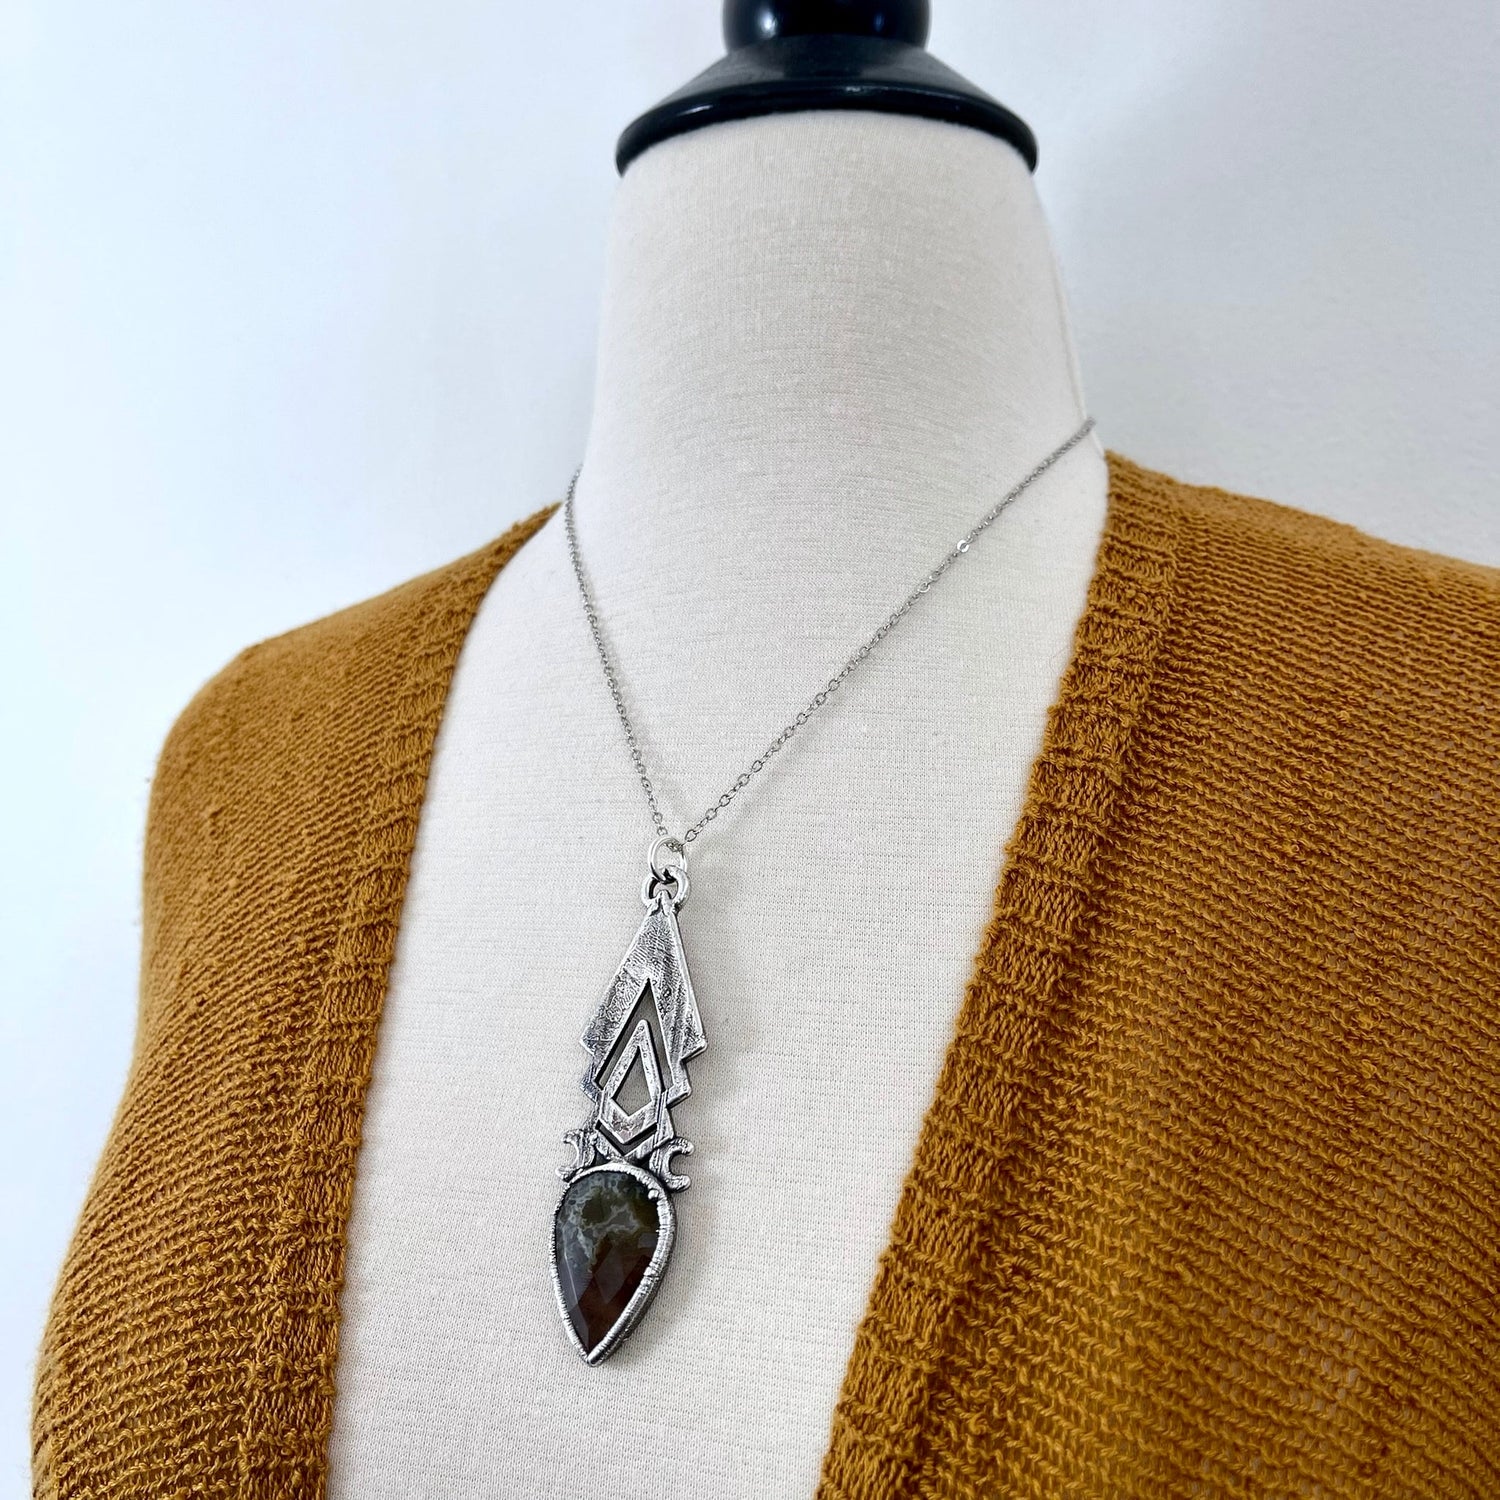 Moss & Moon Collection - Fancy Moss Agate Statement Necklace set in Fine Silver / One of a Kind - by Foxlark